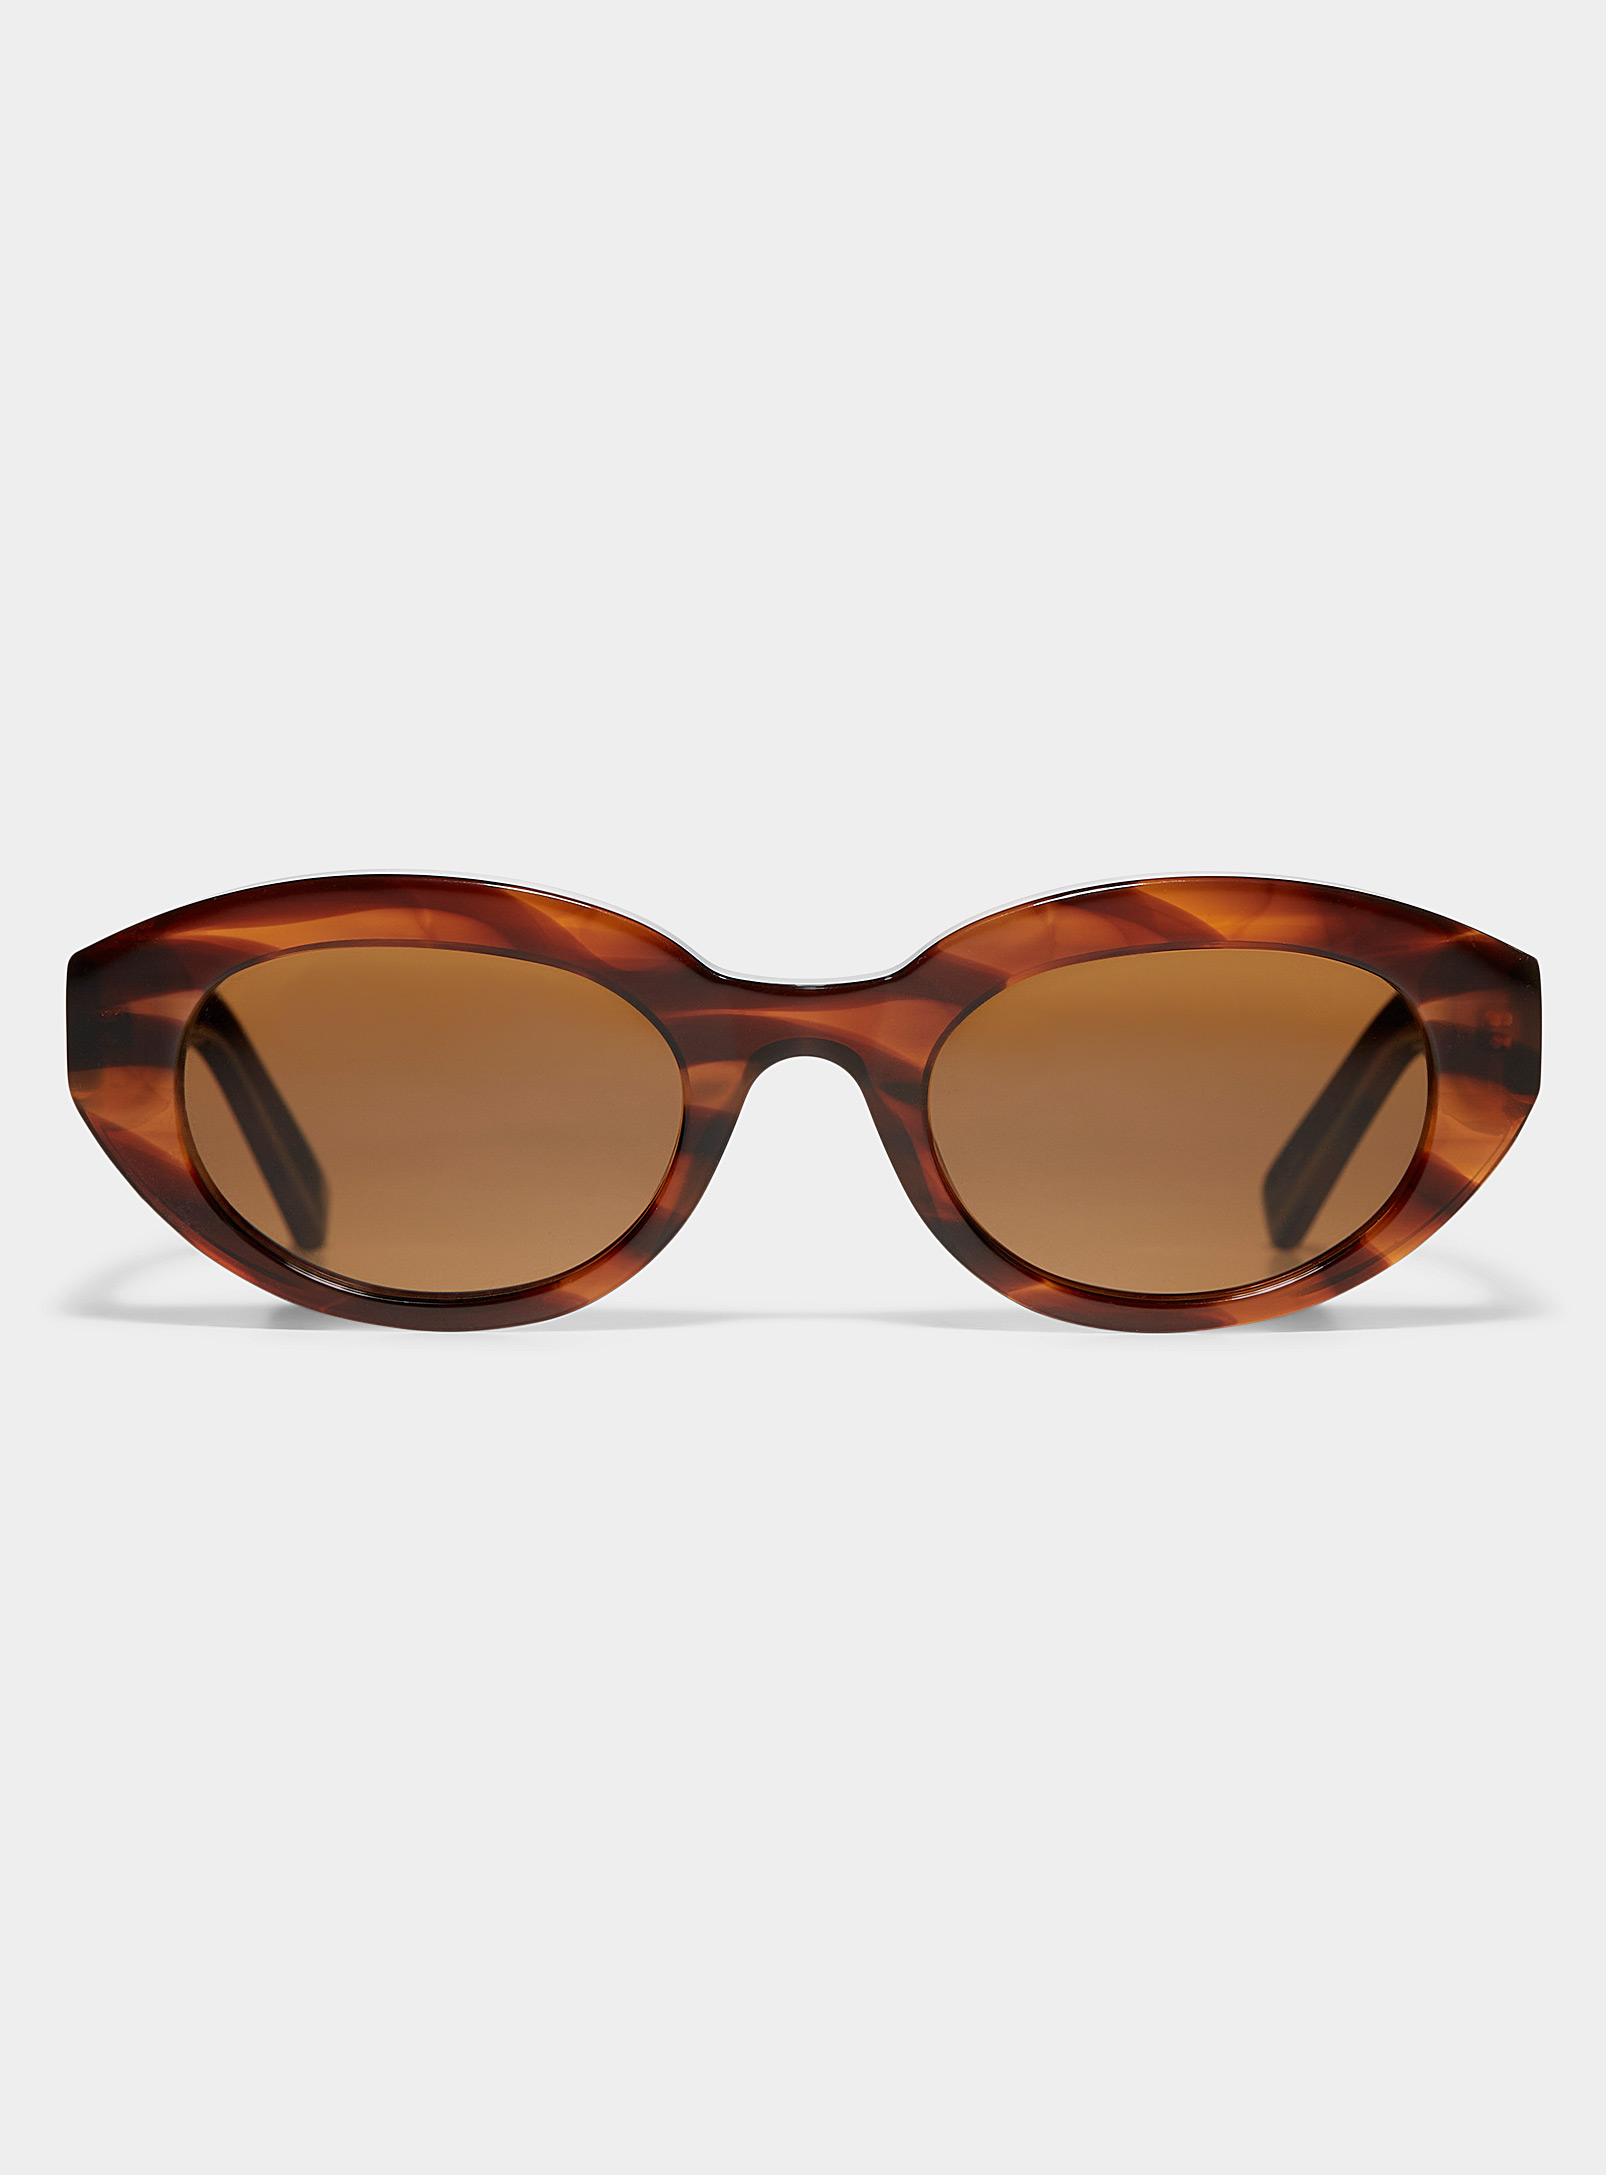 French Kiwis Monroe Oval Sunglasses In Brown